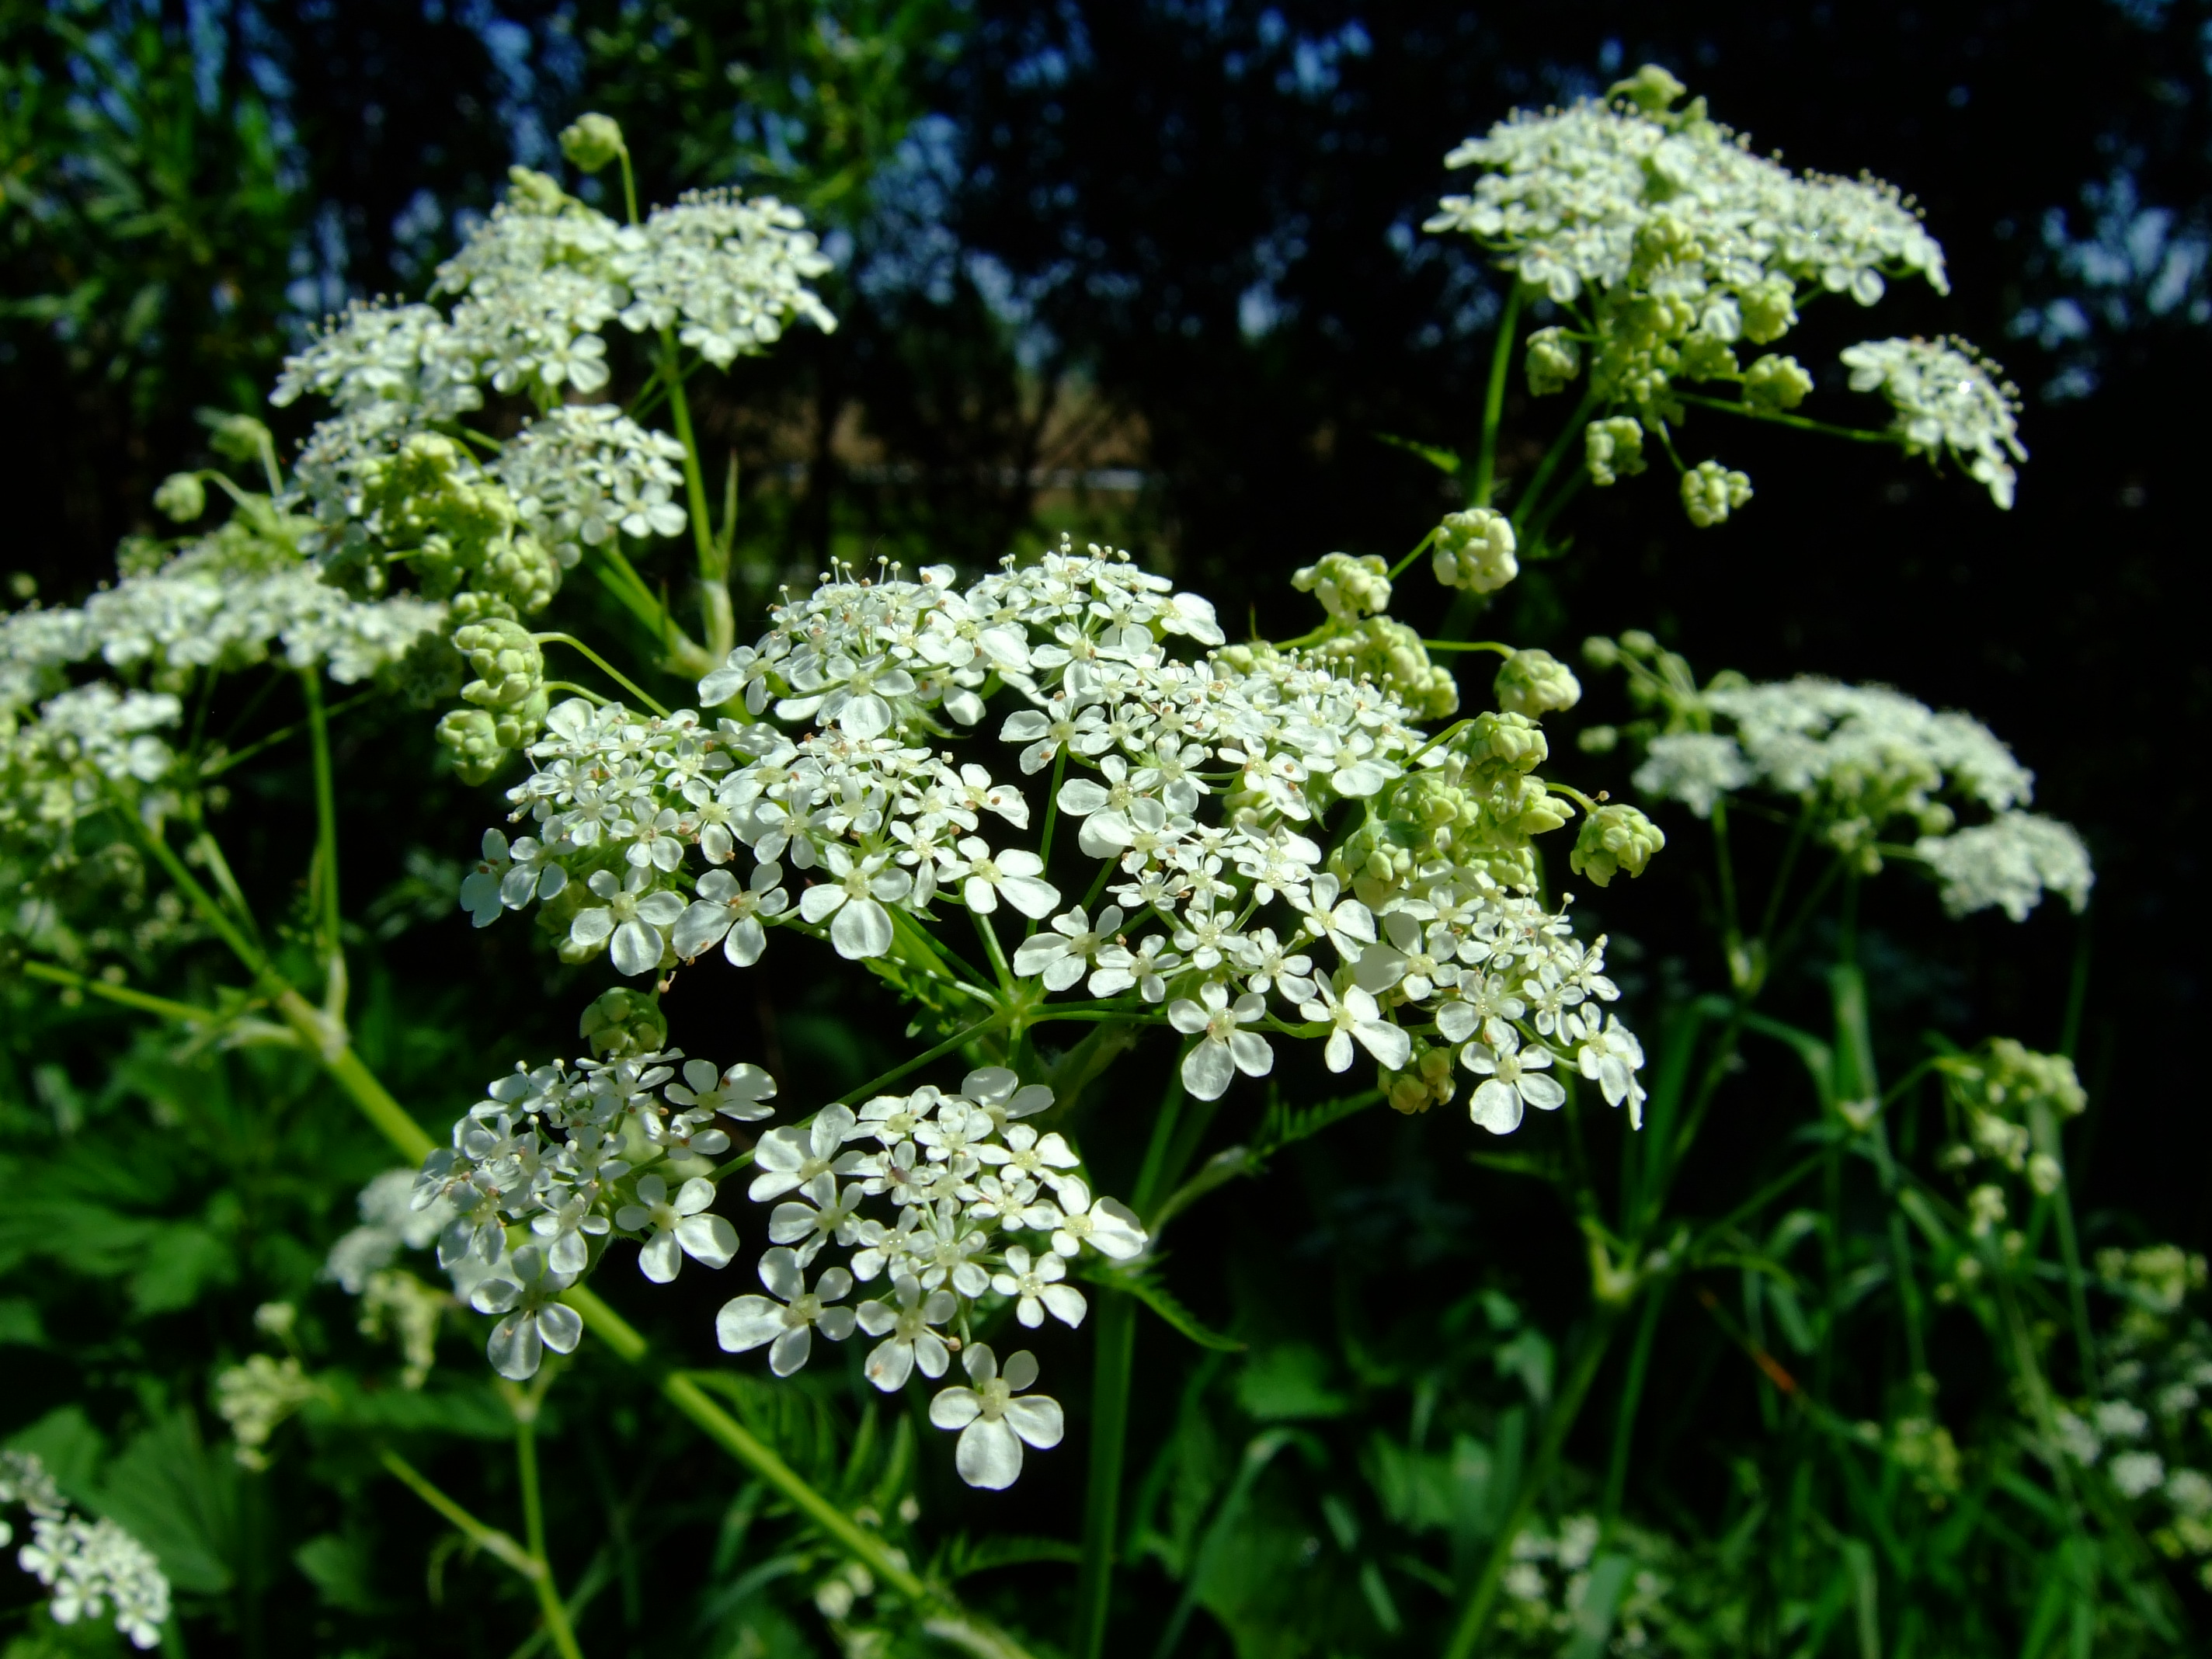 File:Anthriscus sylvestris 1.jpg - Wikimedia Commons